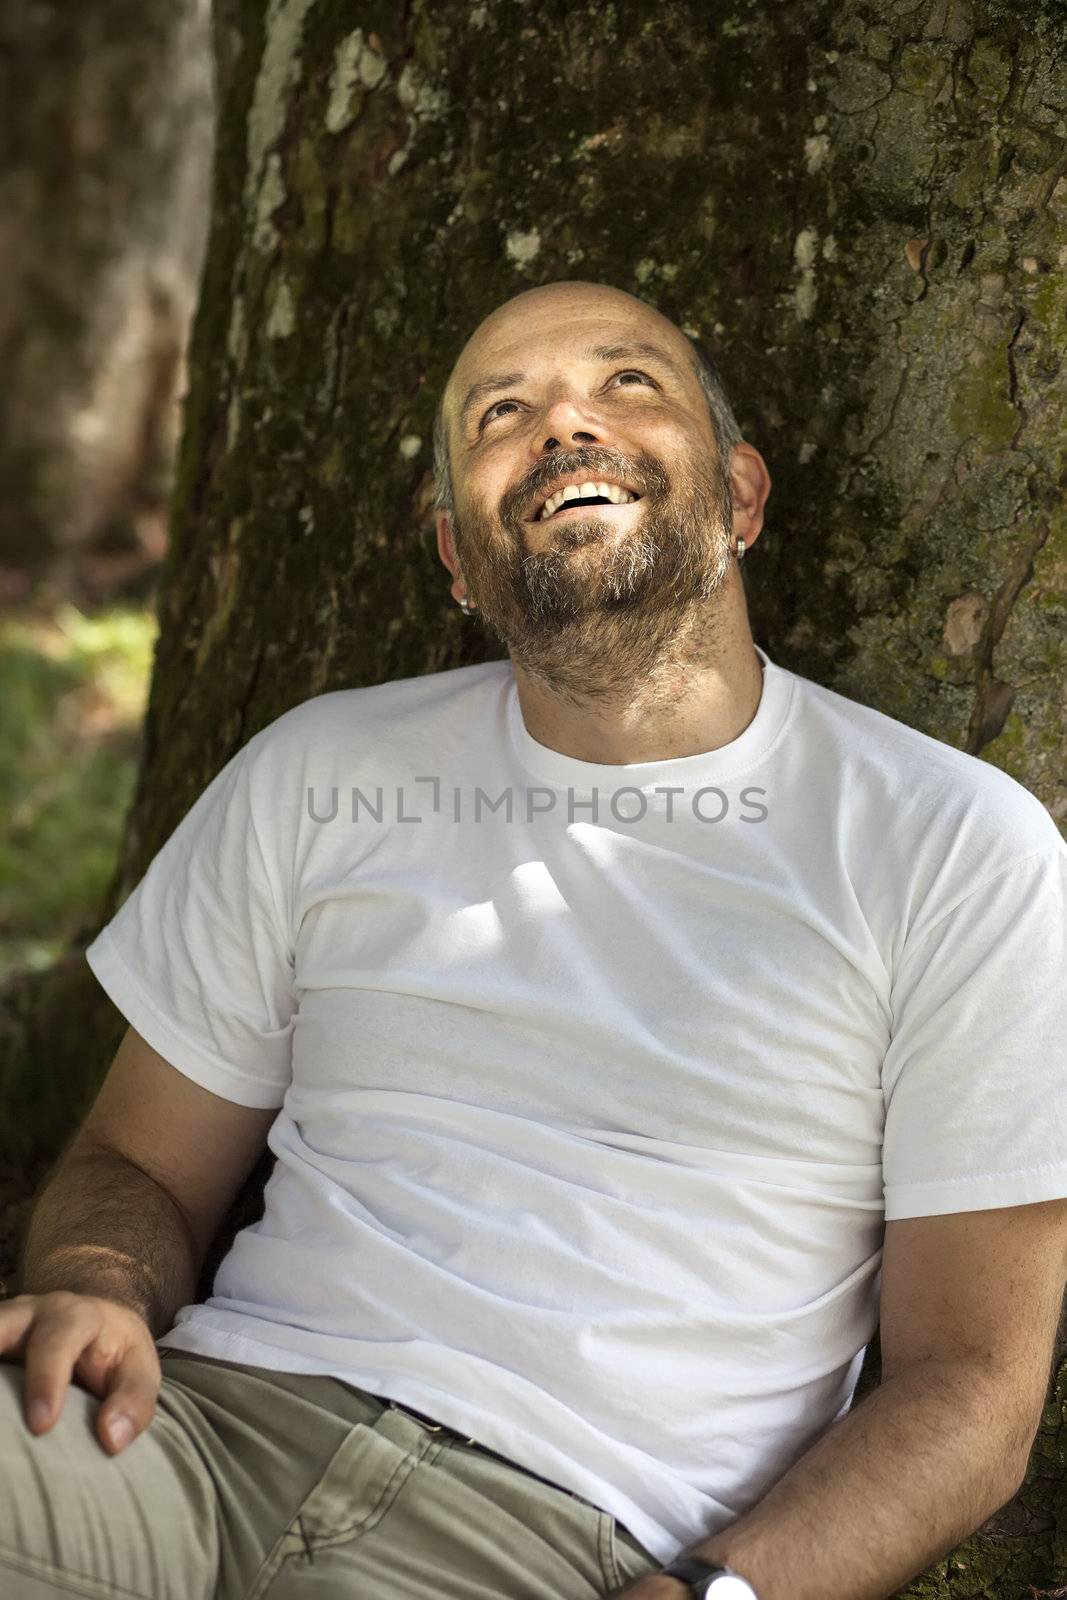 An image of a man with a beard relaxing under a tree